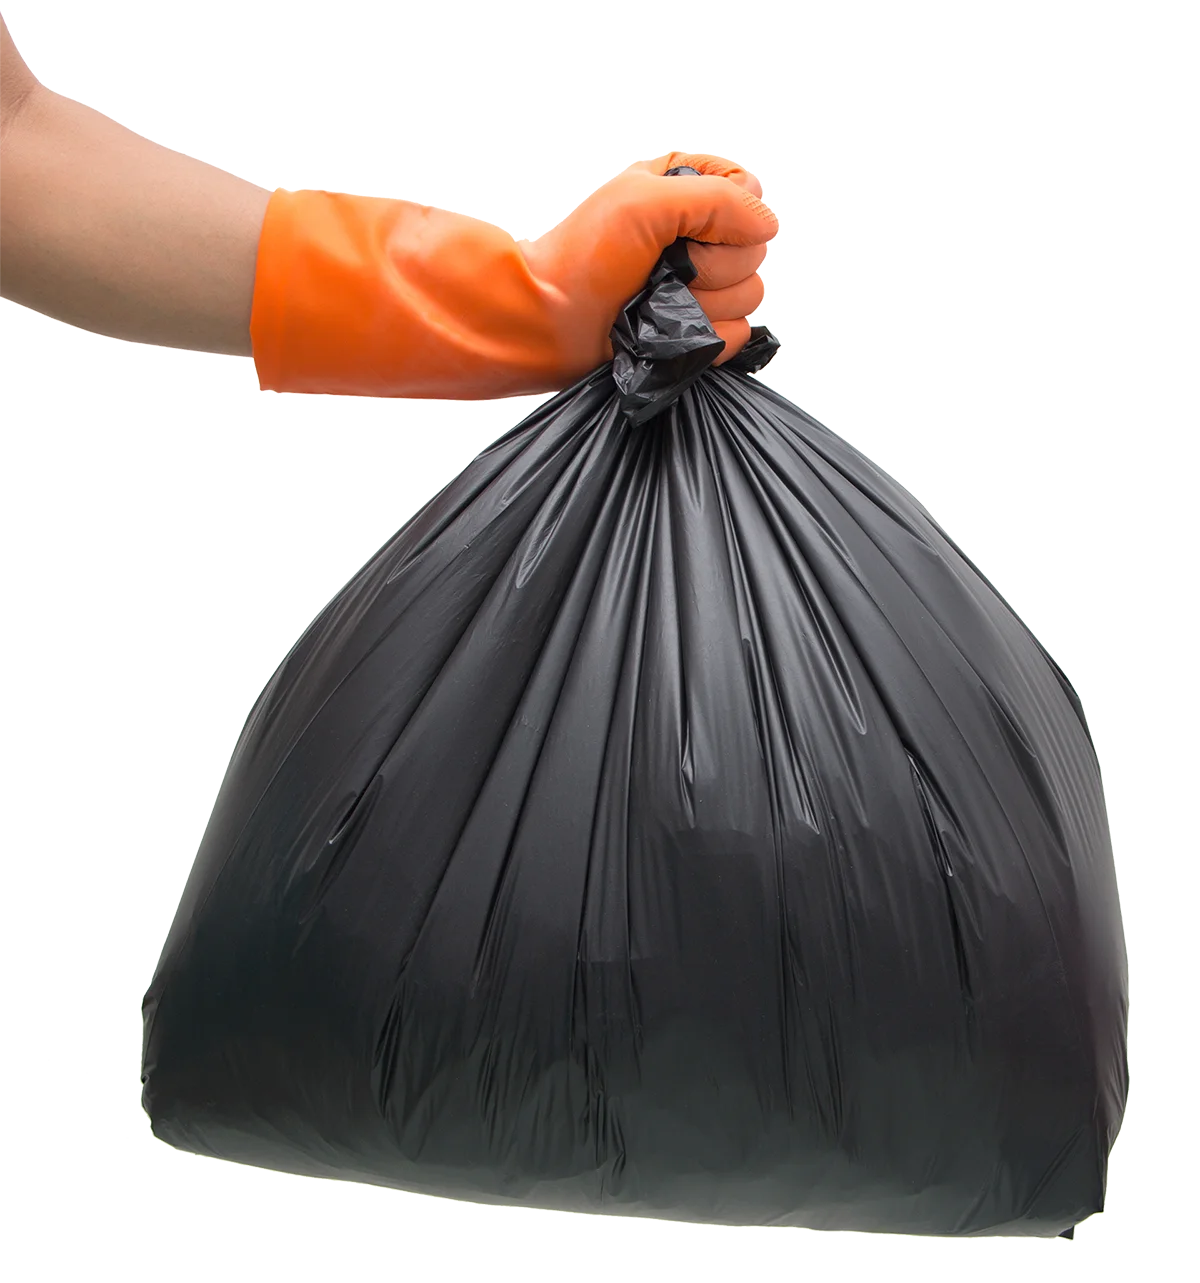 RWS is the doorstep trash company near you that you can count on for expert condominium trash pickup services.